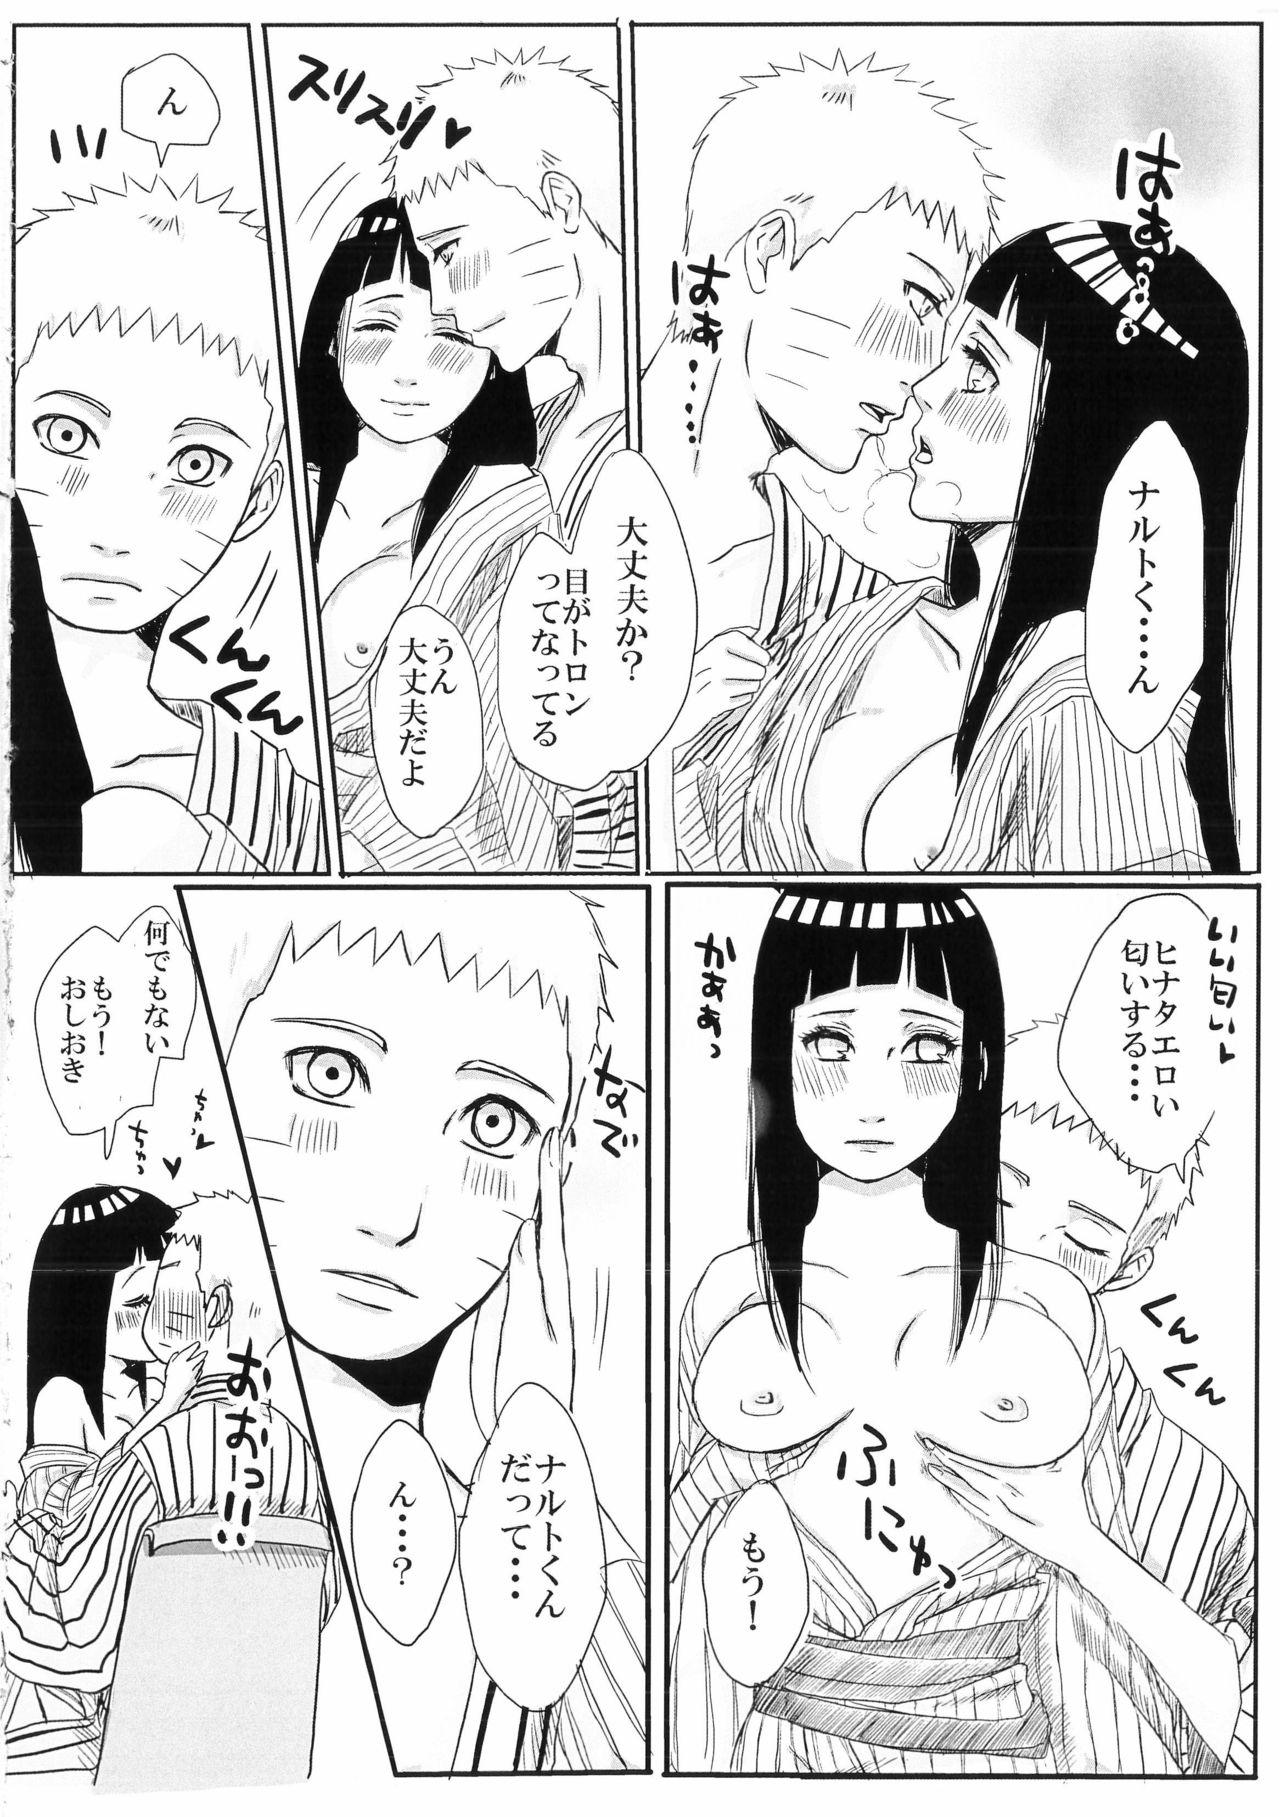 Chubby Before the wedding - Naruto Squirting - Page 6